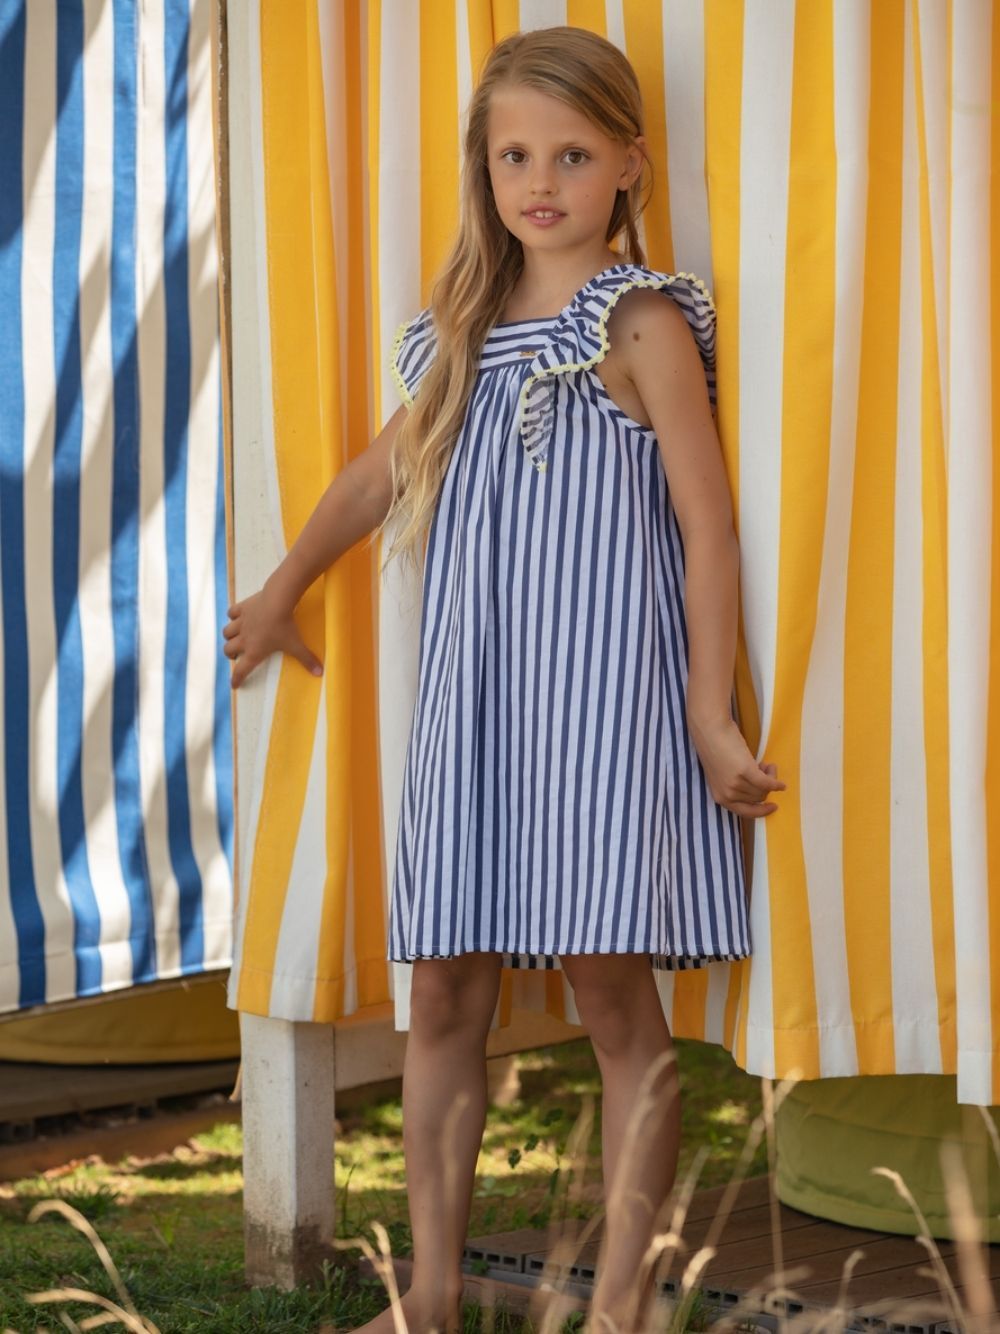 Blue and white striped girls dress